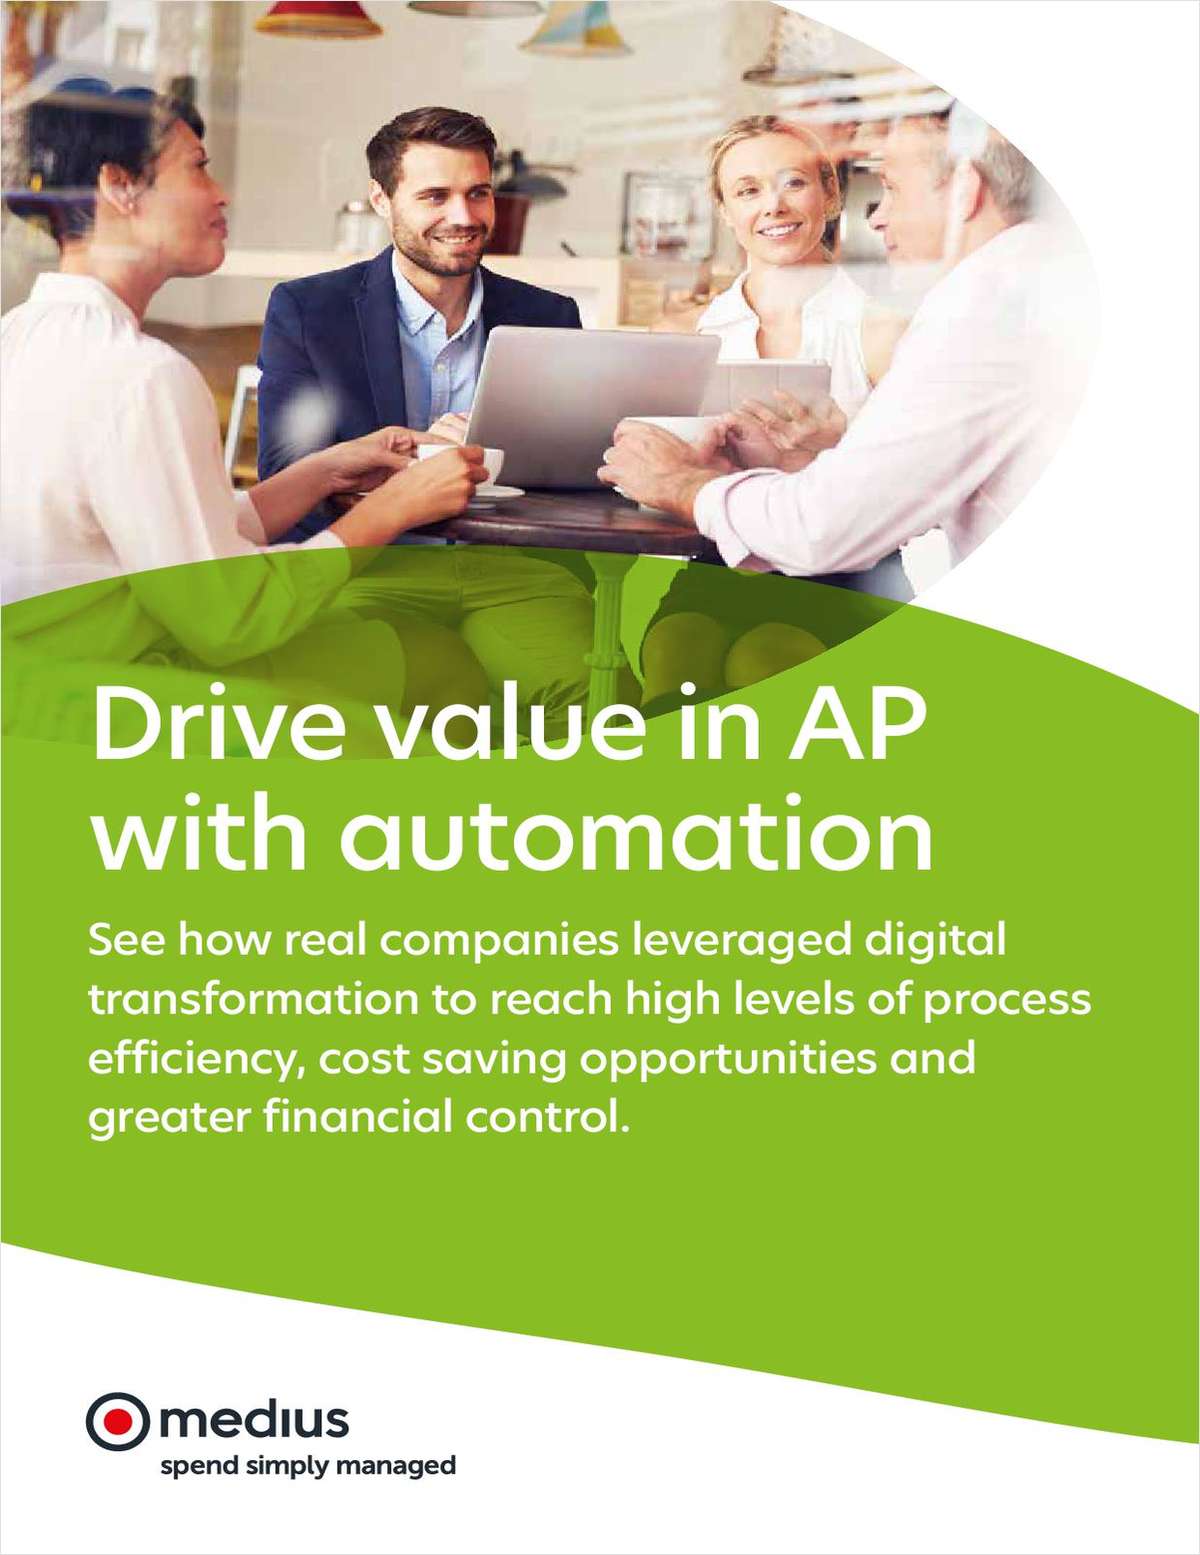 How your peers are driving value through AP Automation